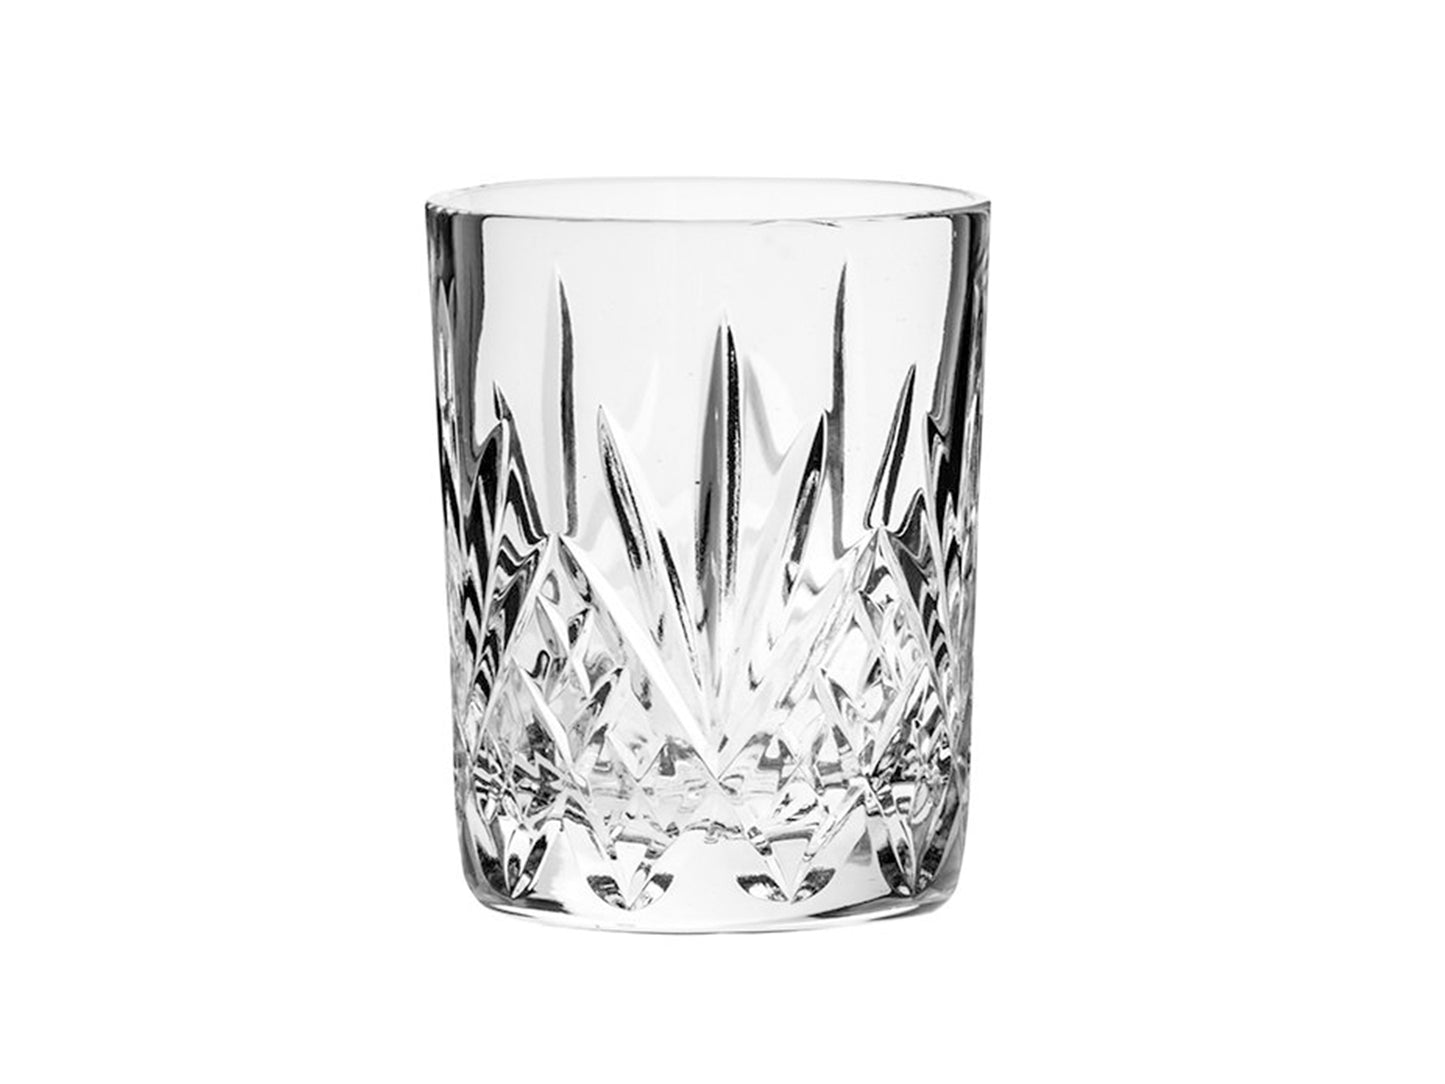 A small crystal whisky tumbler with a tive-pointed fan cut into the outside on a bed of diamonds